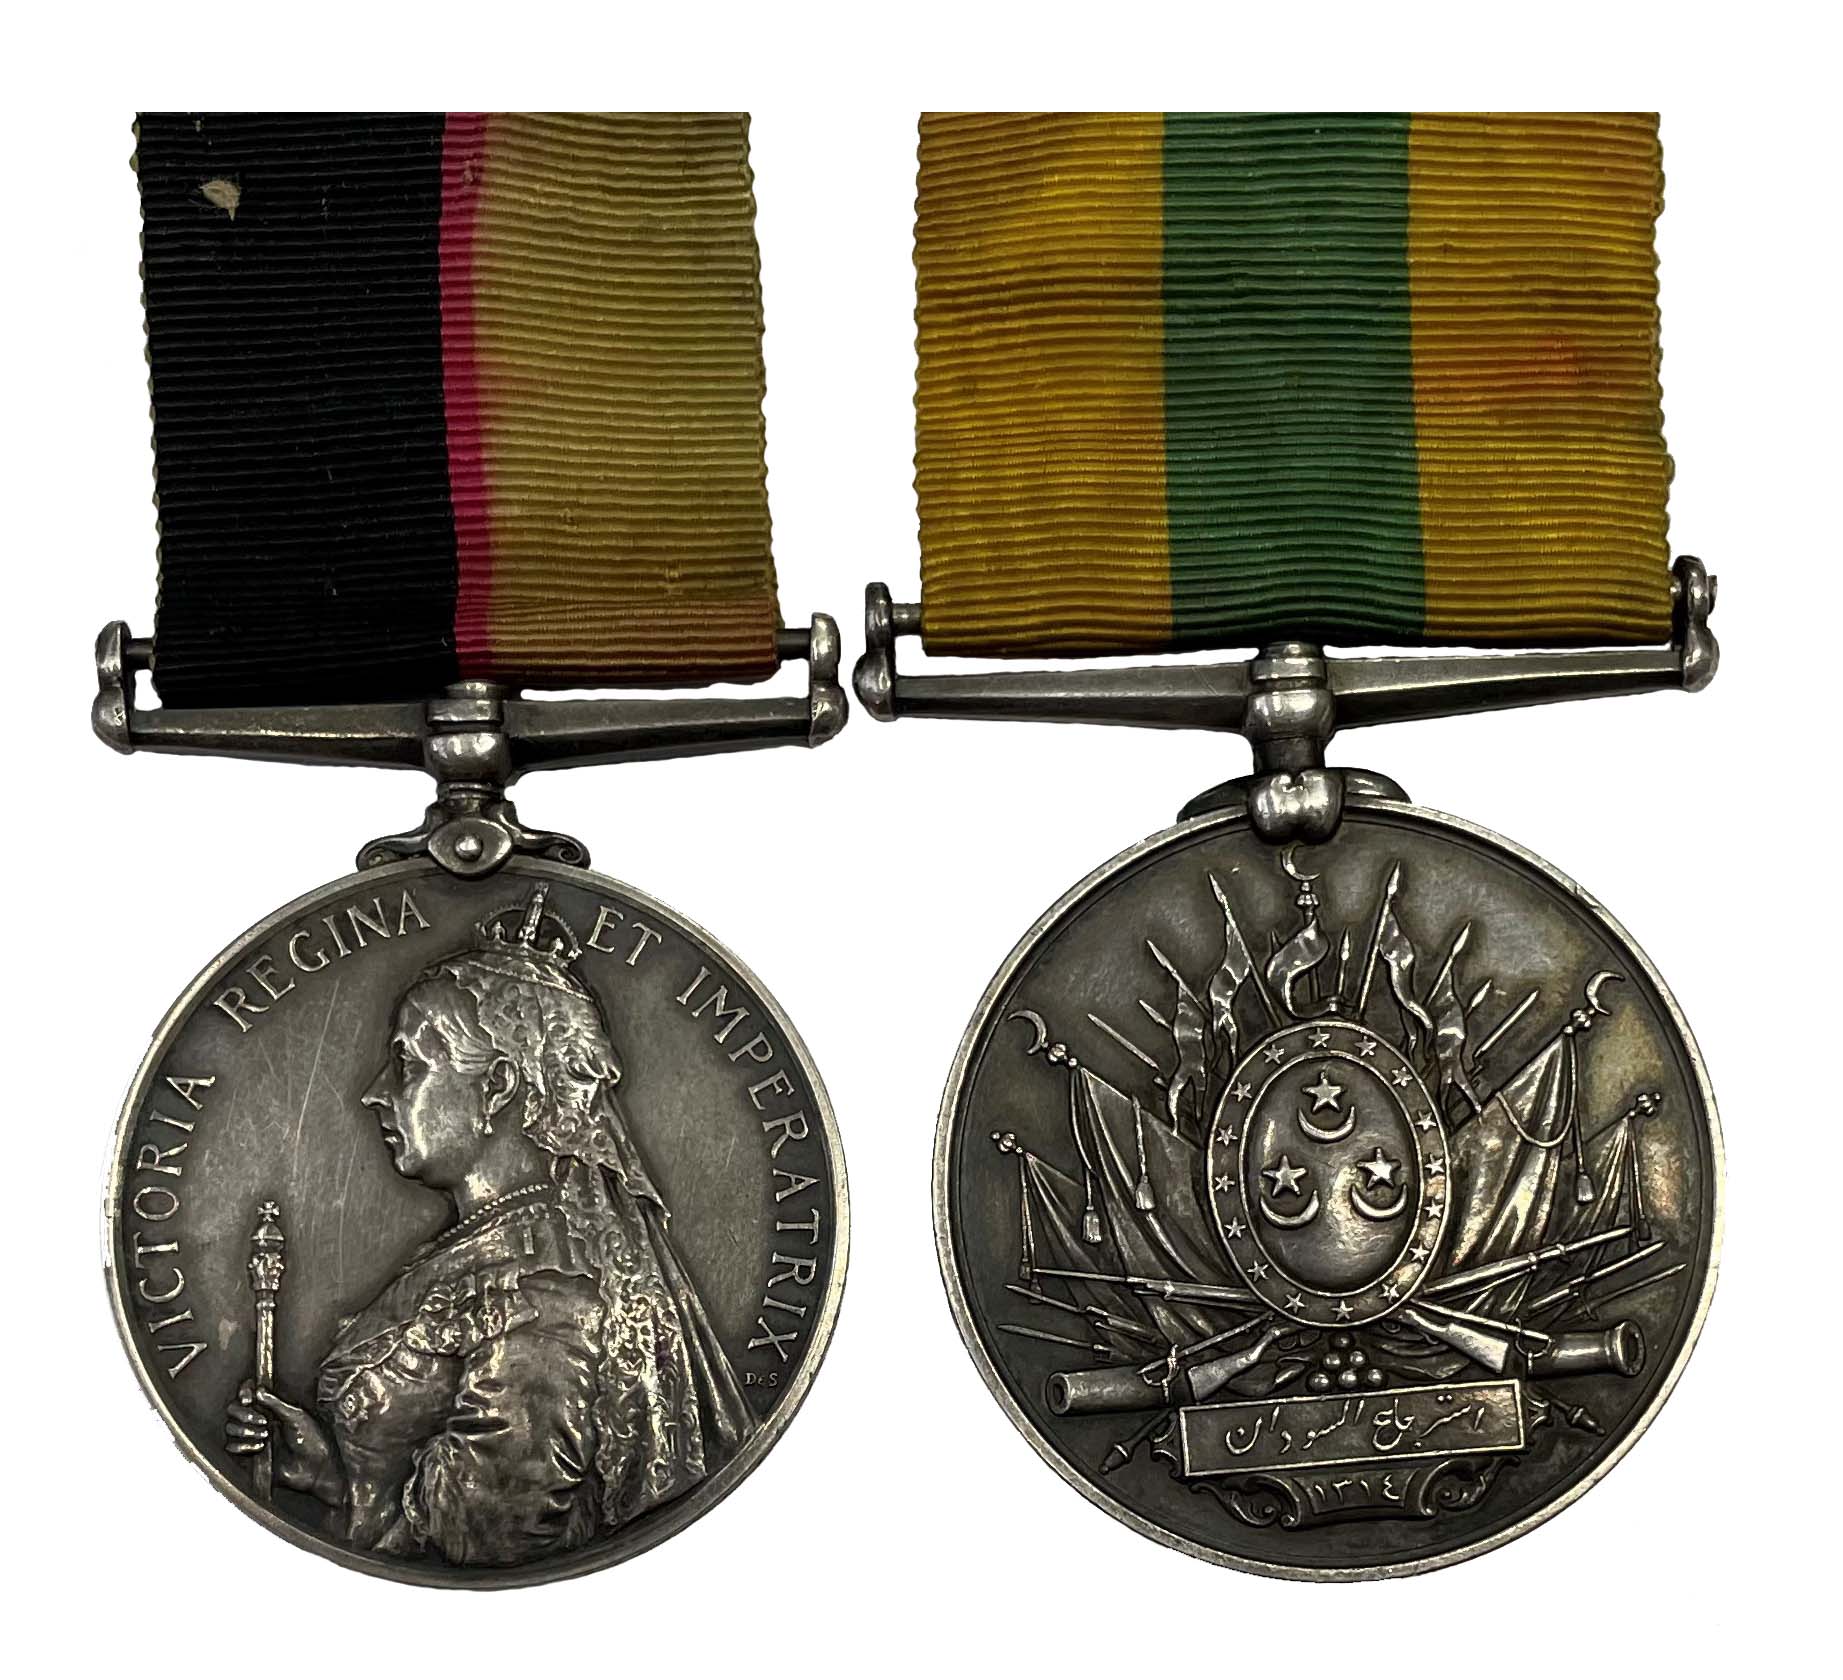 A Sudan Pair awarded to Private George James Johnson